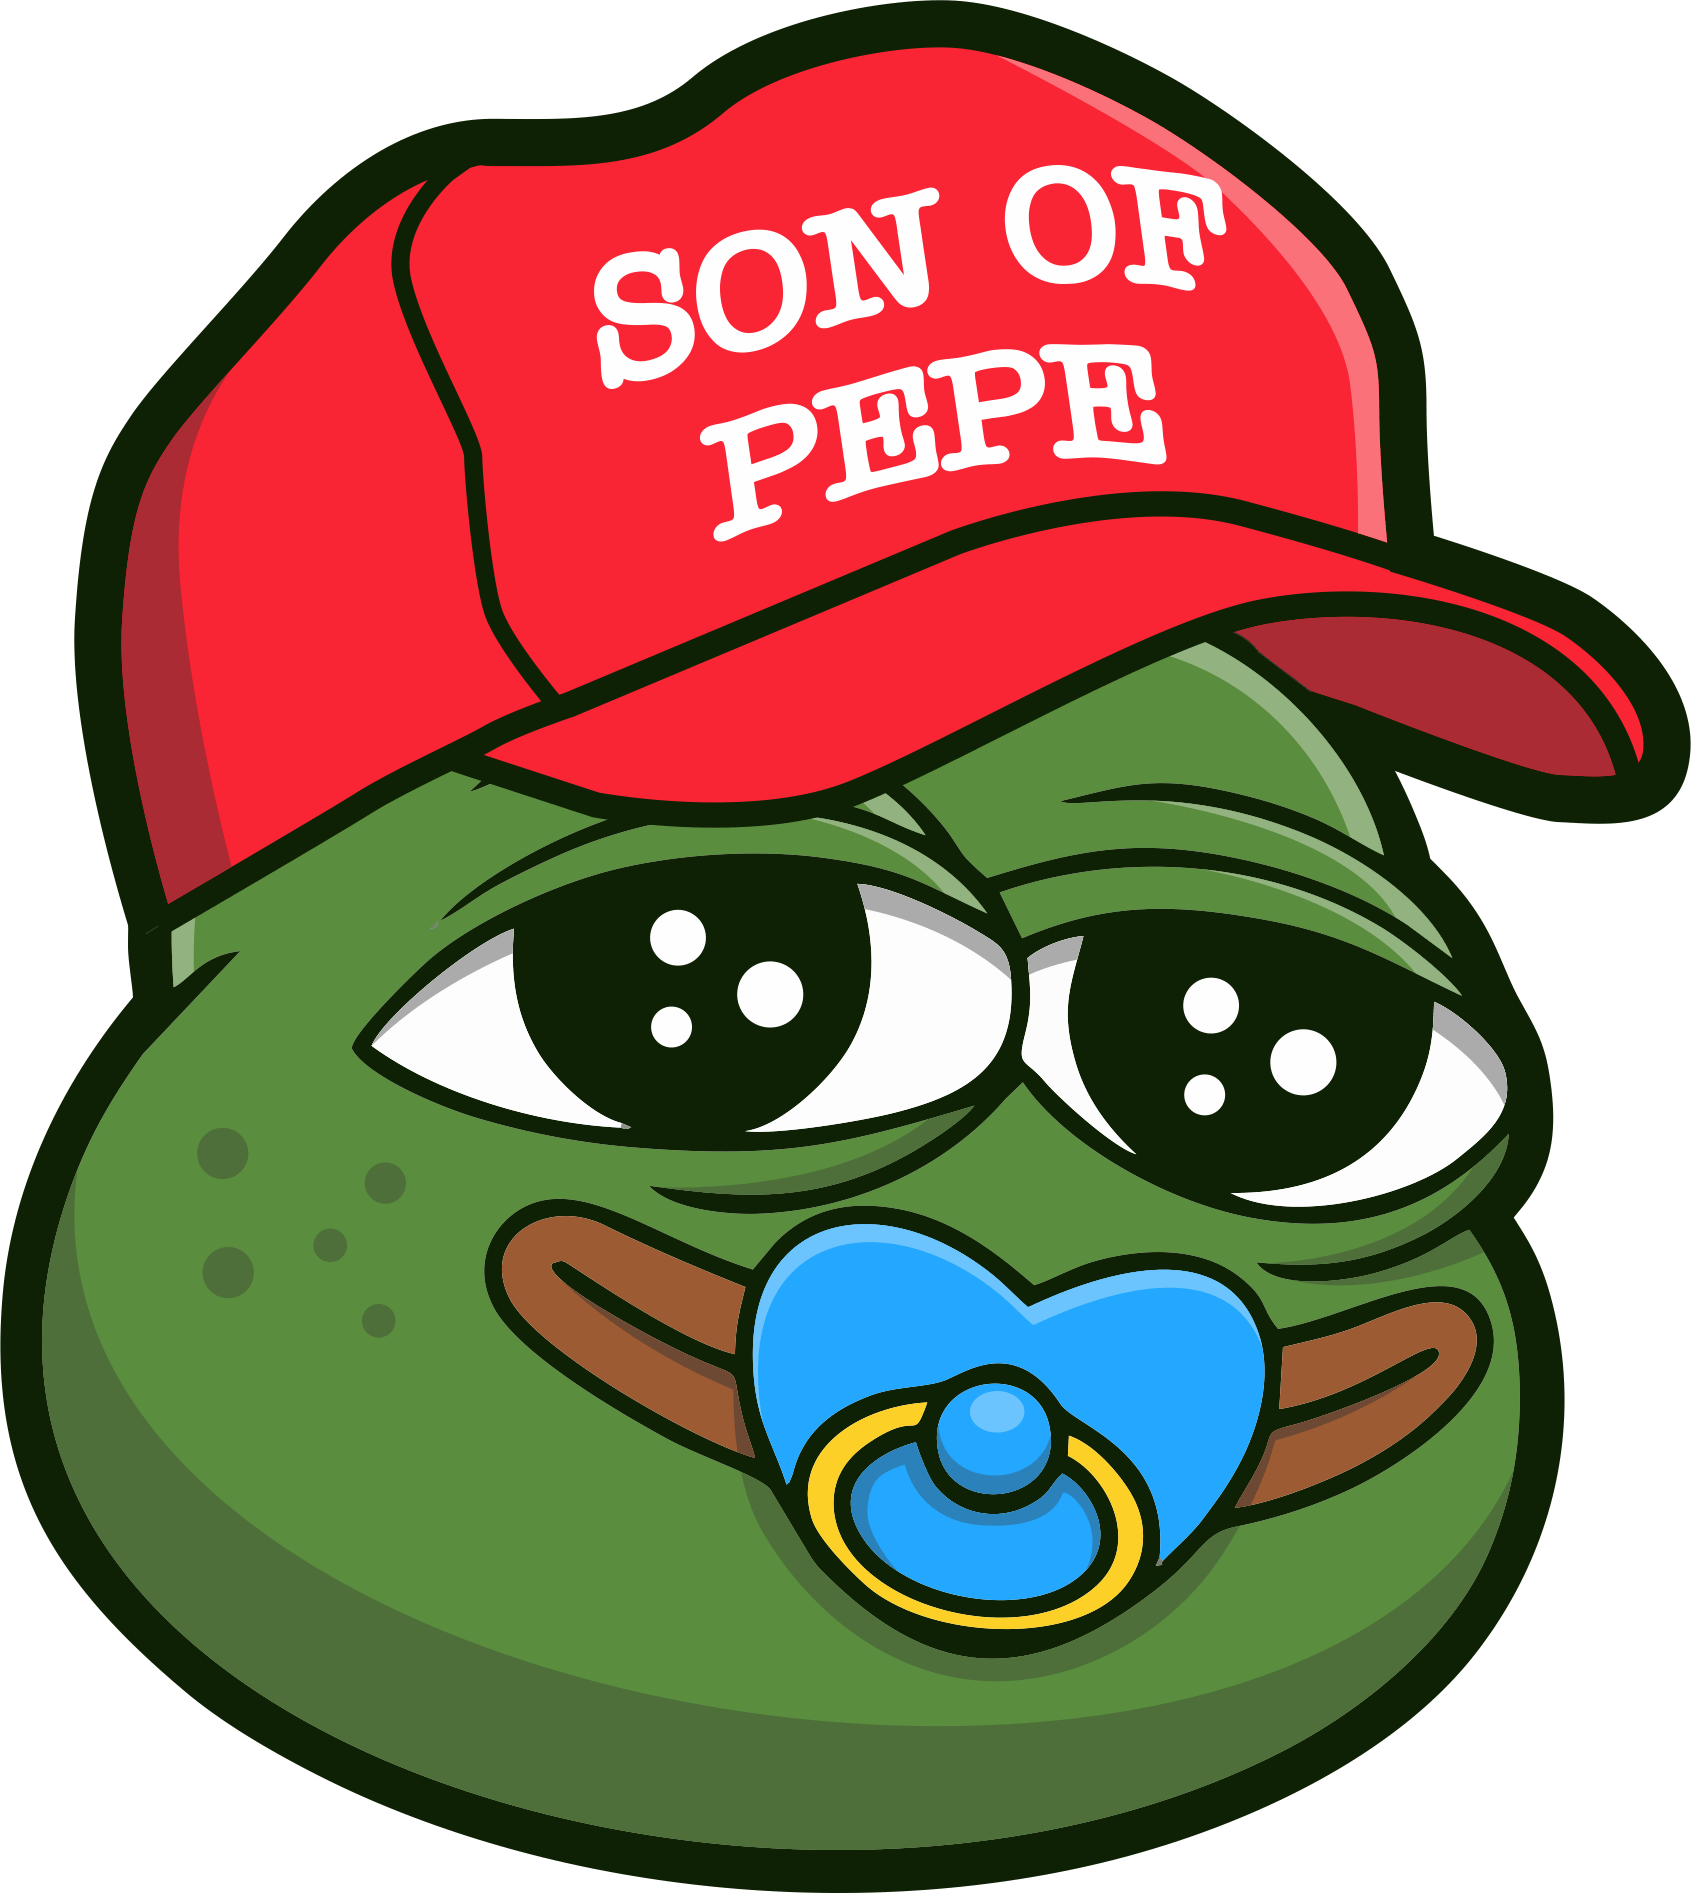  Son of Pepe (SOP) Achieved Phenomenal 1000% Growth Within 24 Hours of Launch